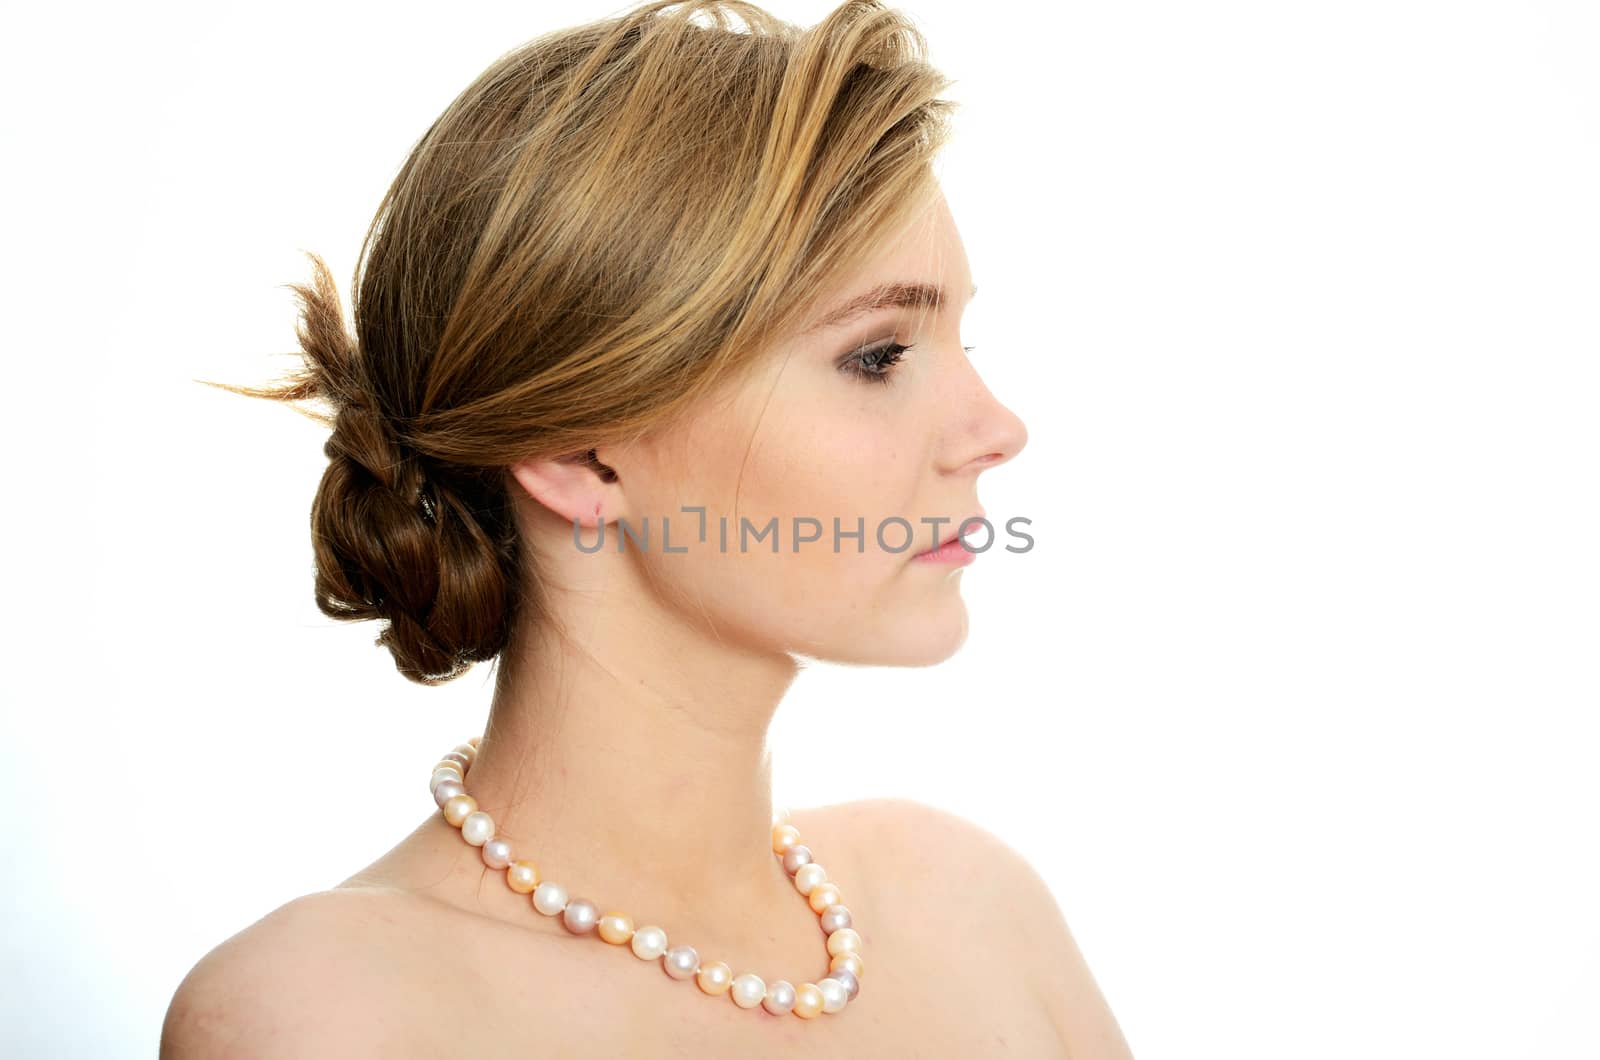 Young girl with pearls by bartekchiny